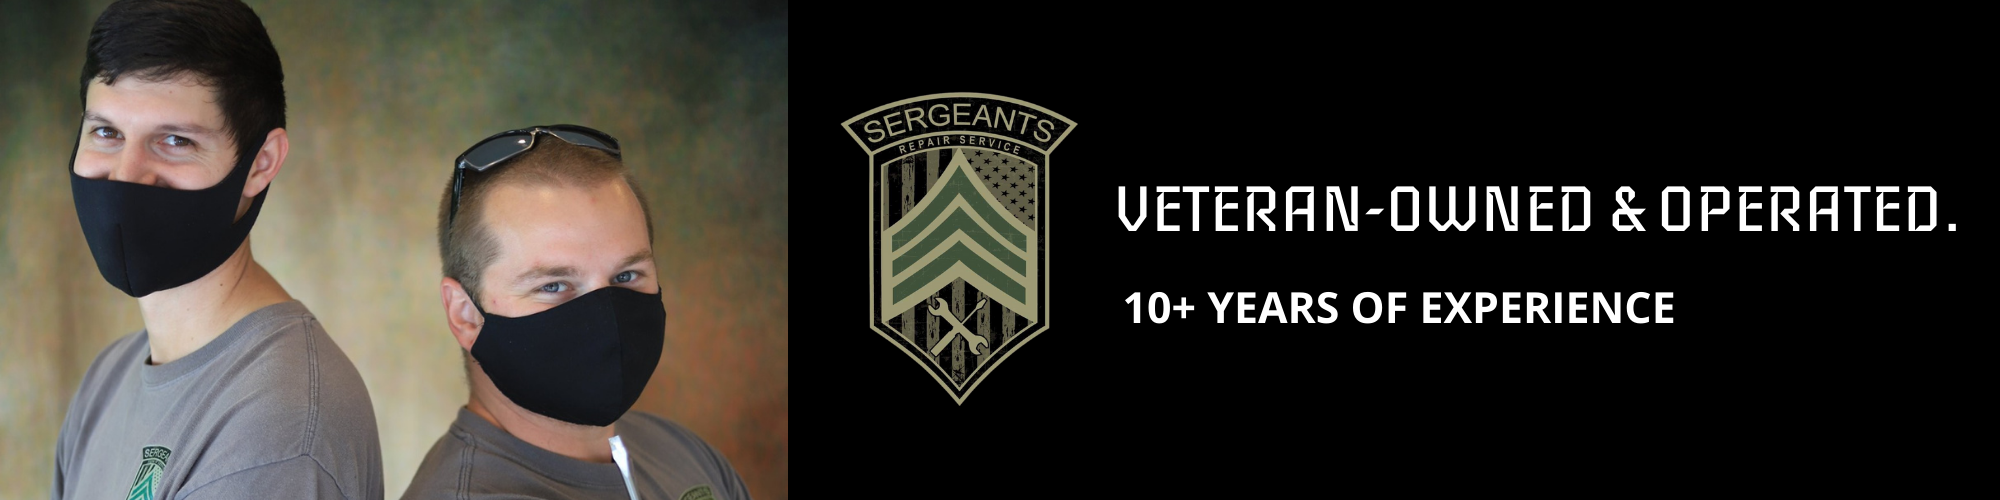 Veteran owned & operated with 10+ years of experience 